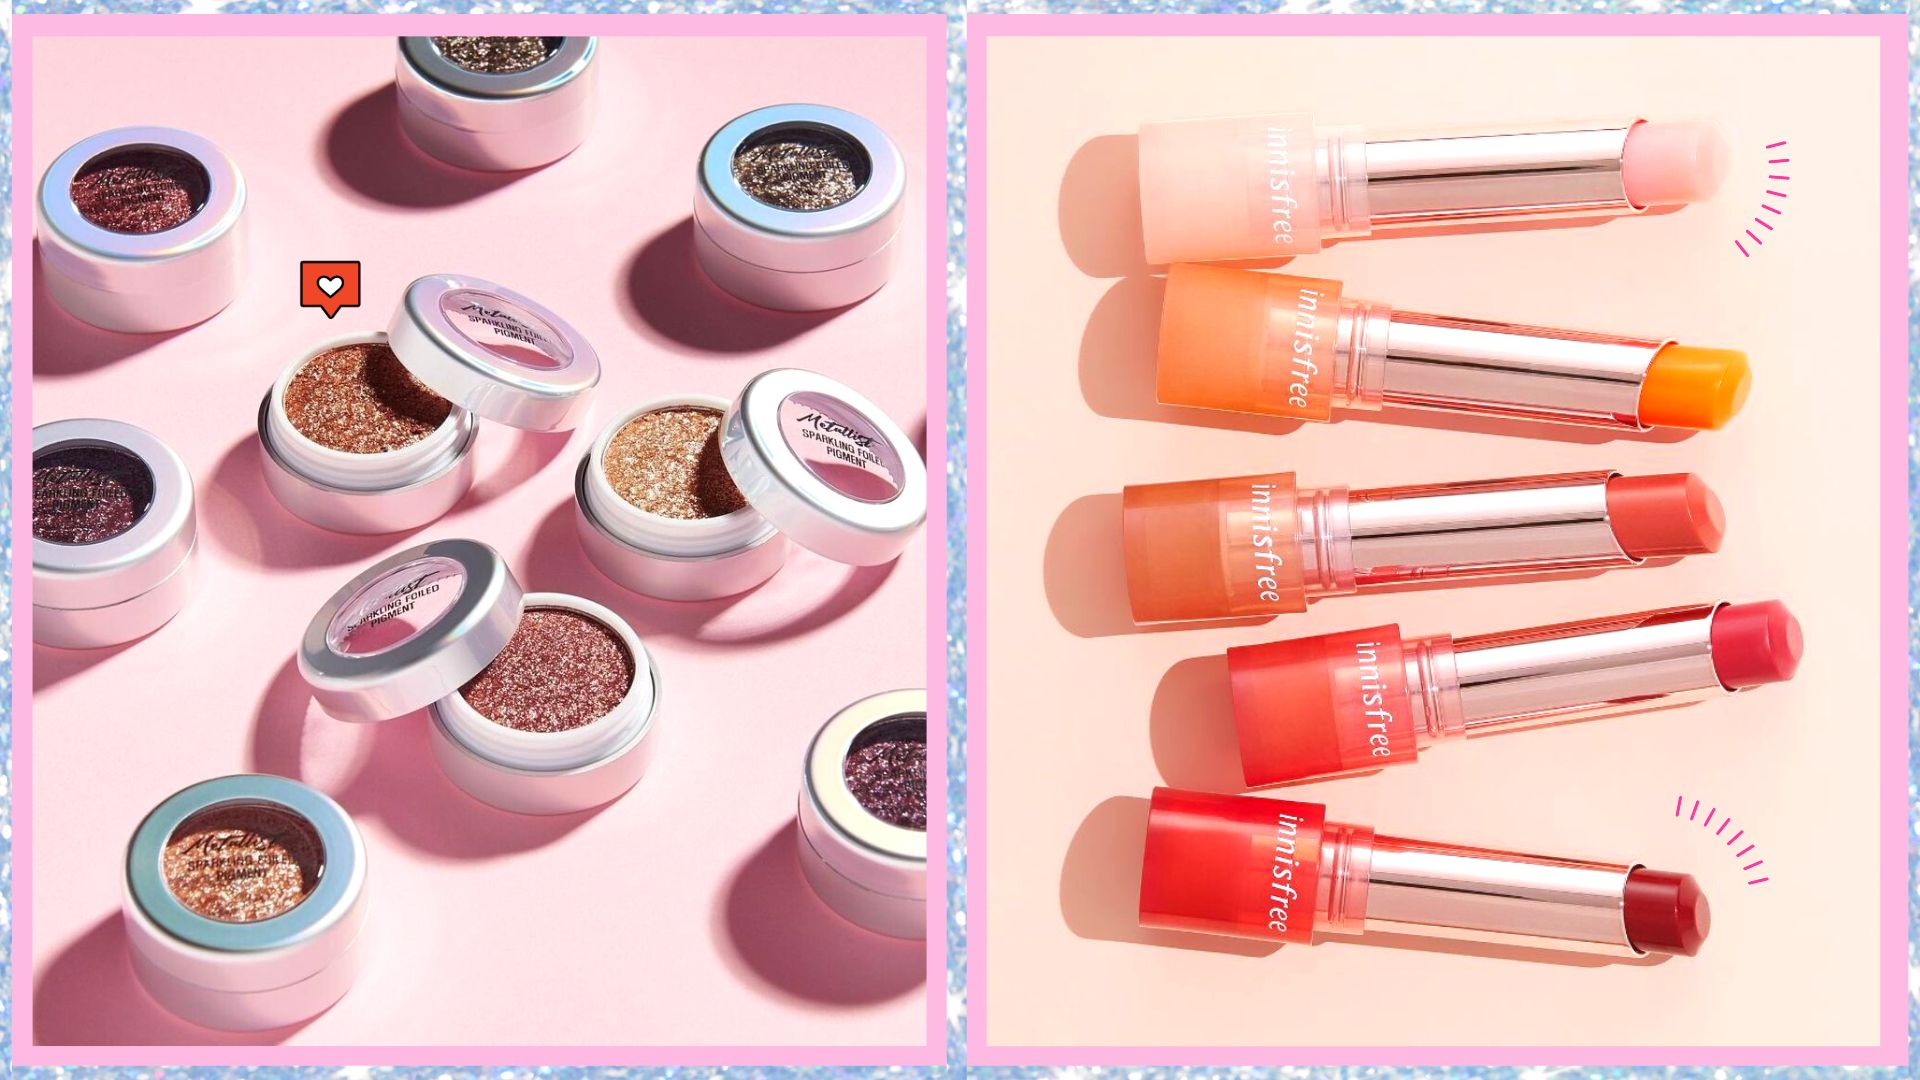 6 Must-Buy K-Beauty Cosmetics To Complete Your ~*Sparkling*~ Holiday Look